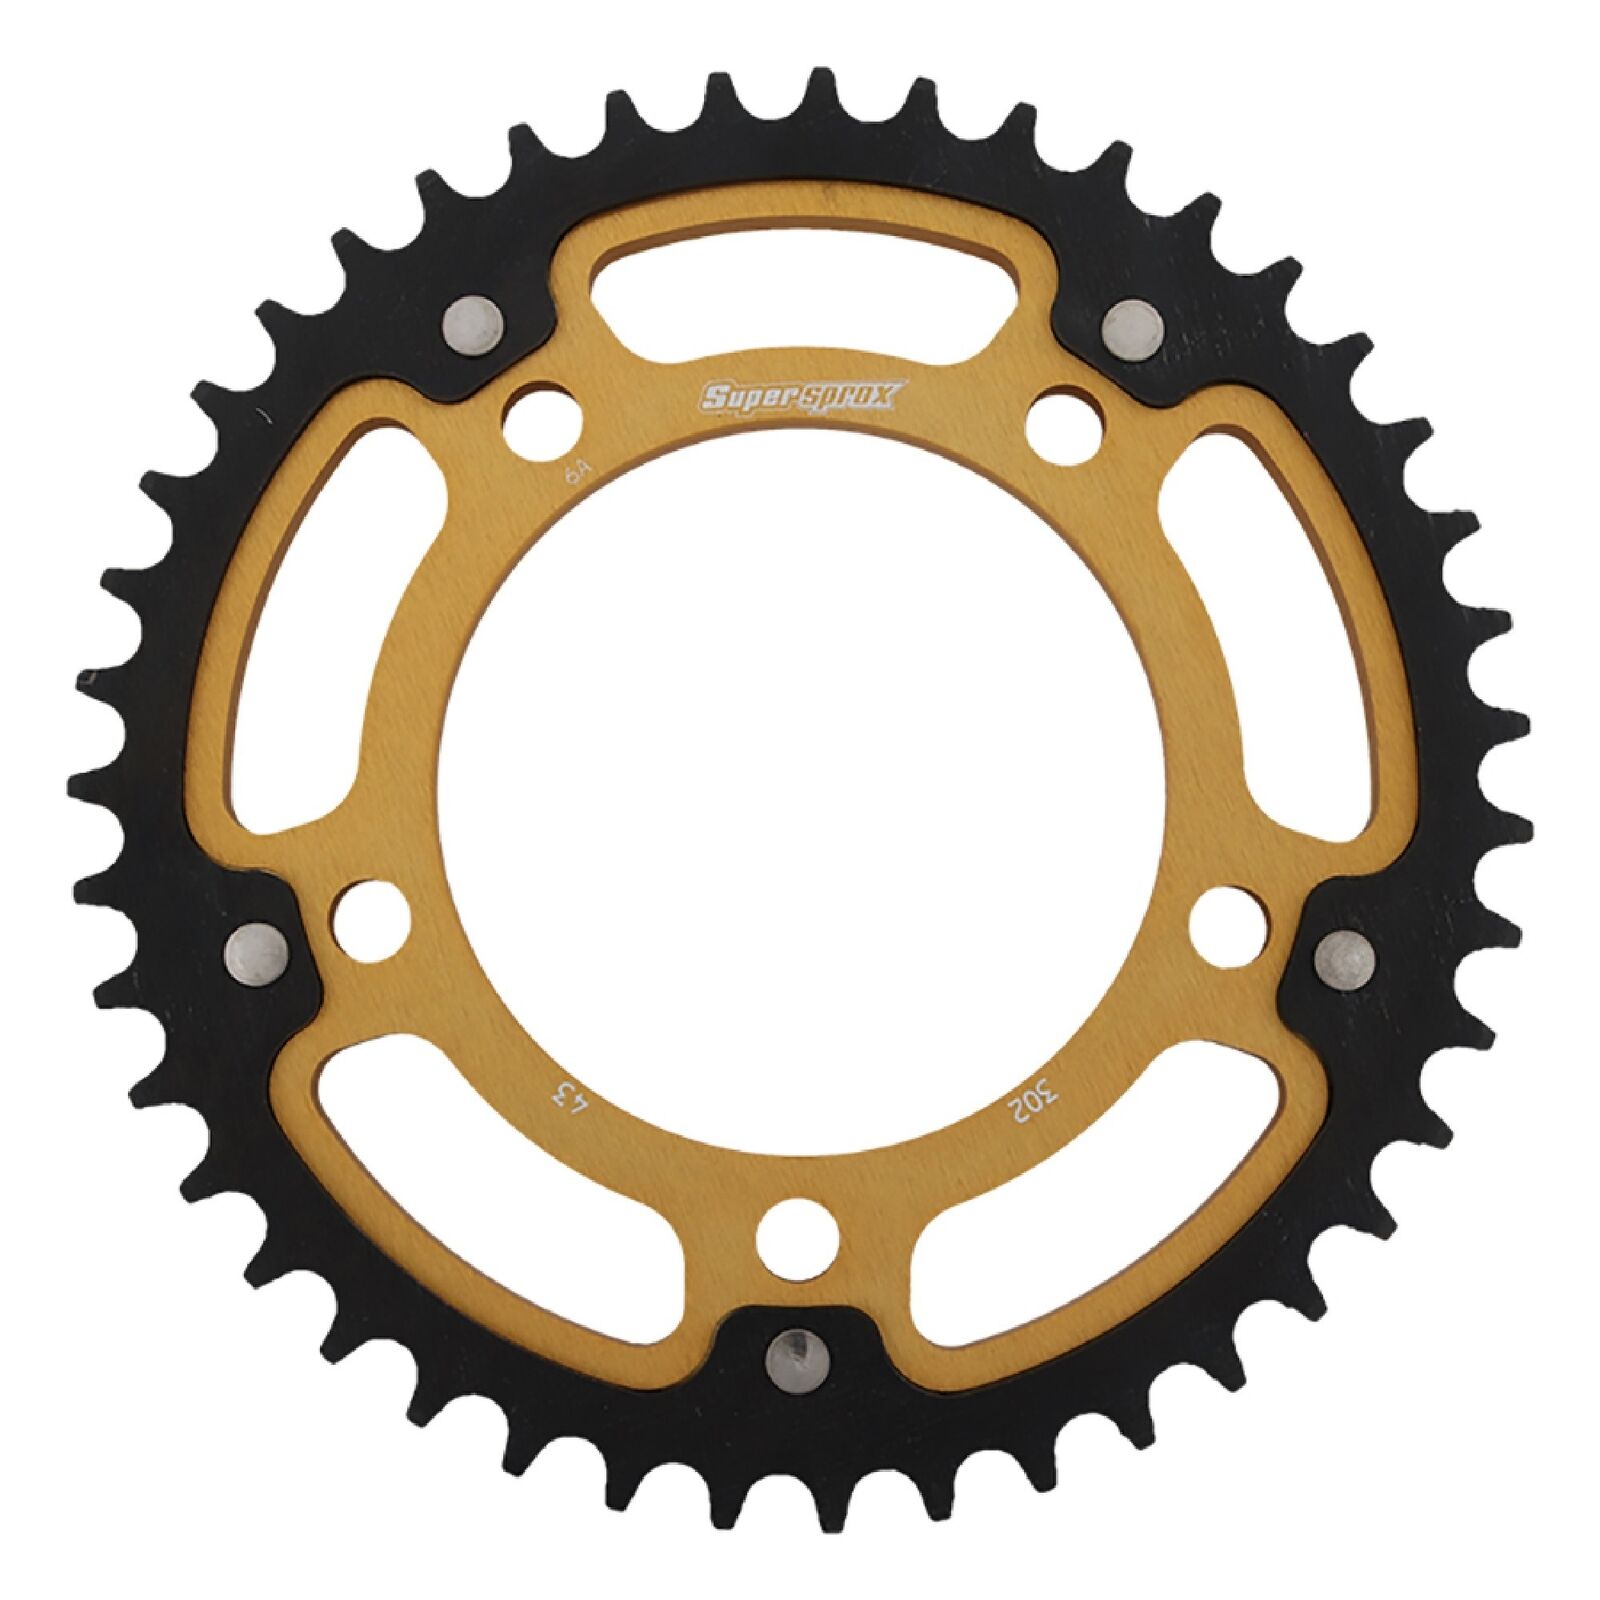 Supersprox Stealth sprocket Gold For 43T Chain Size 530; RST-302-43-GLD